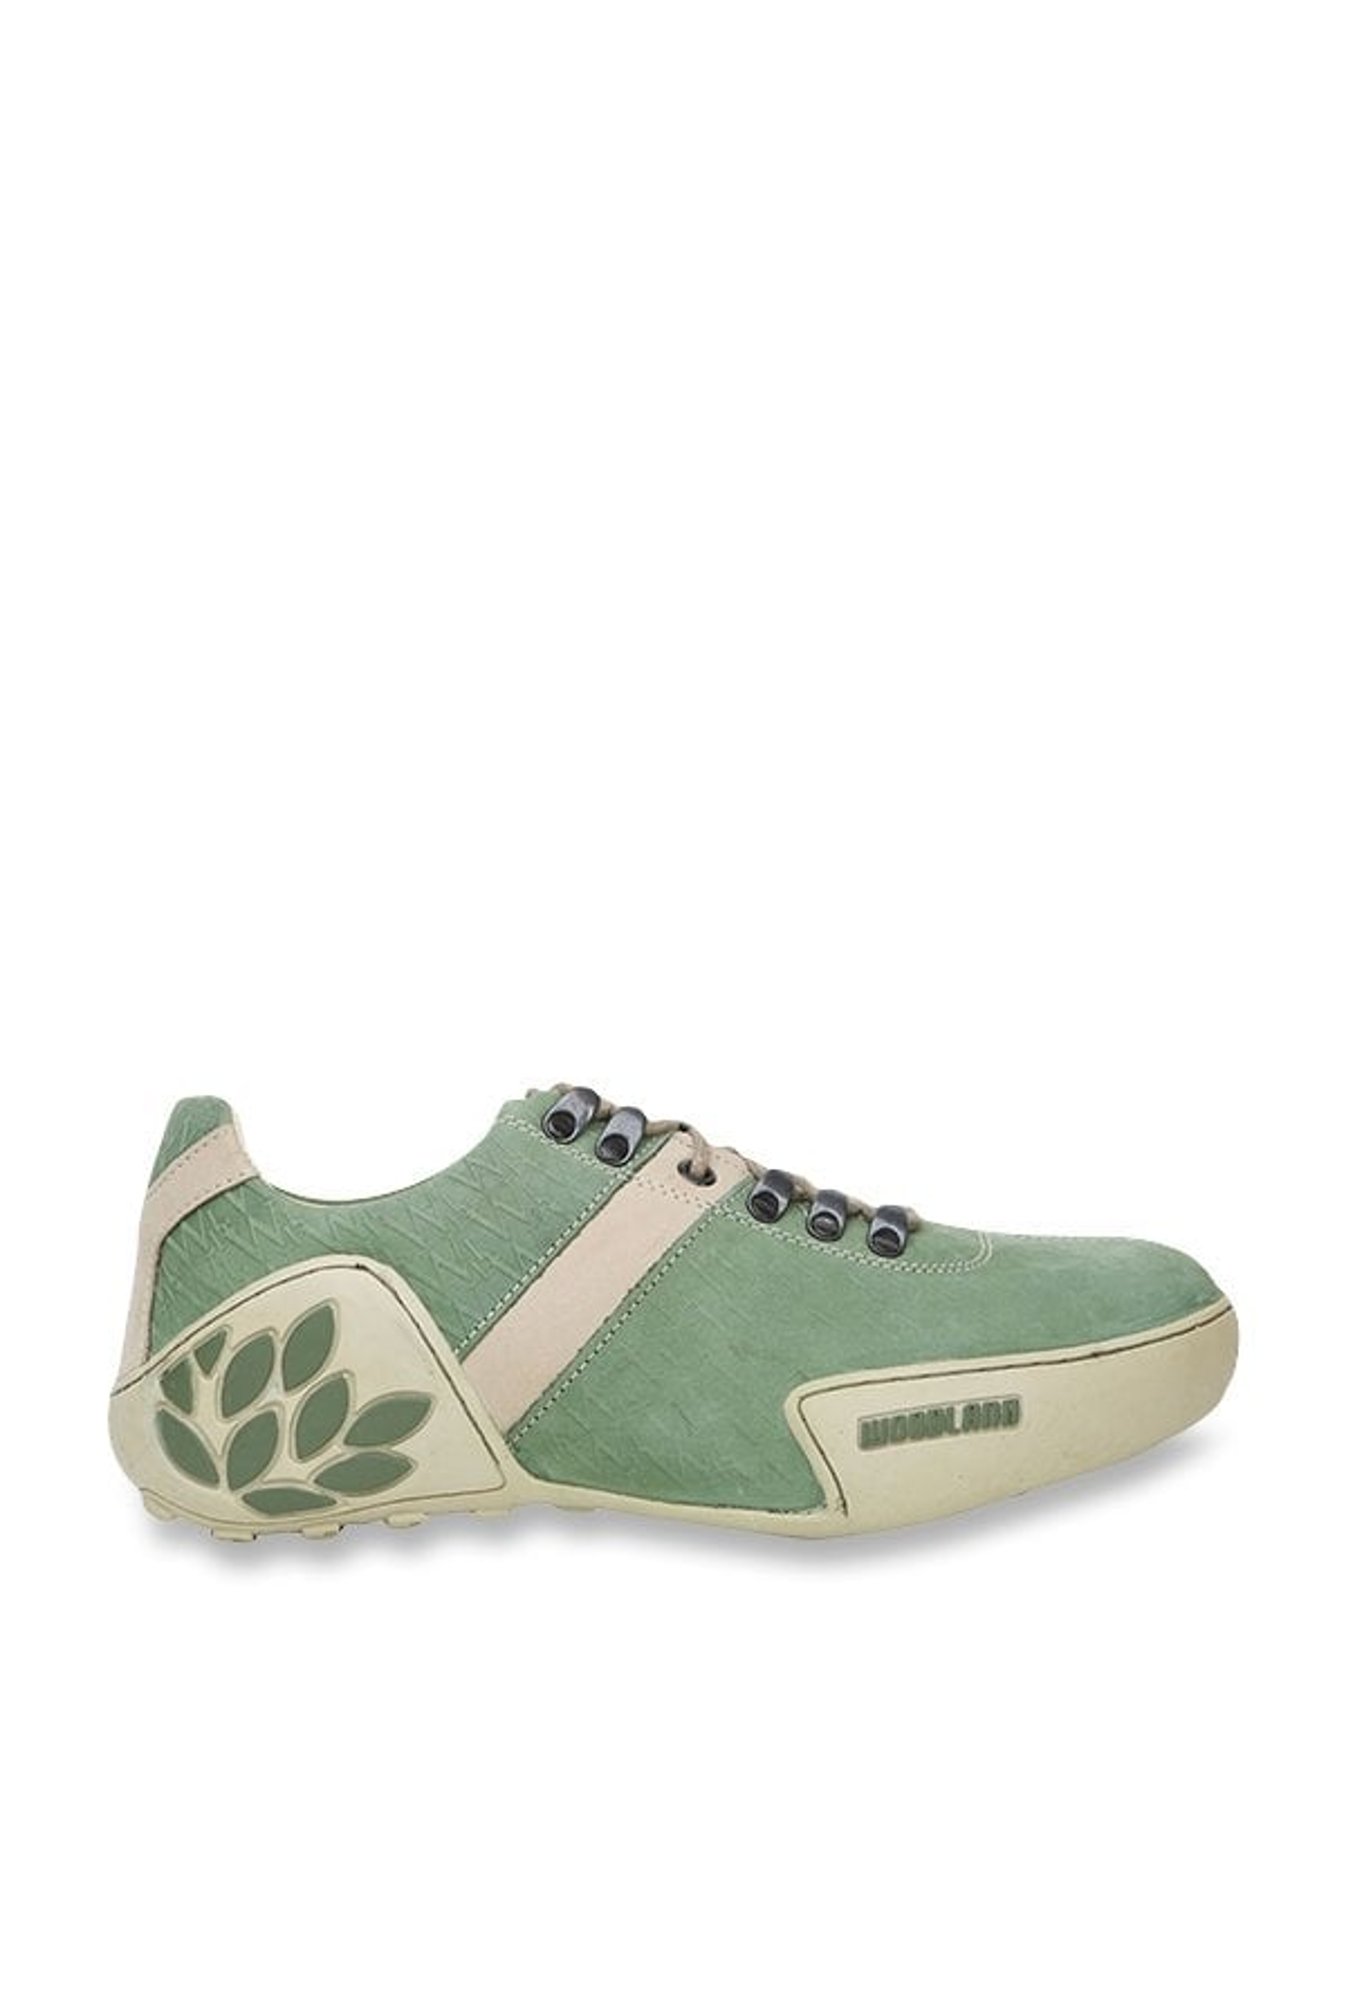 woodland green sneakers